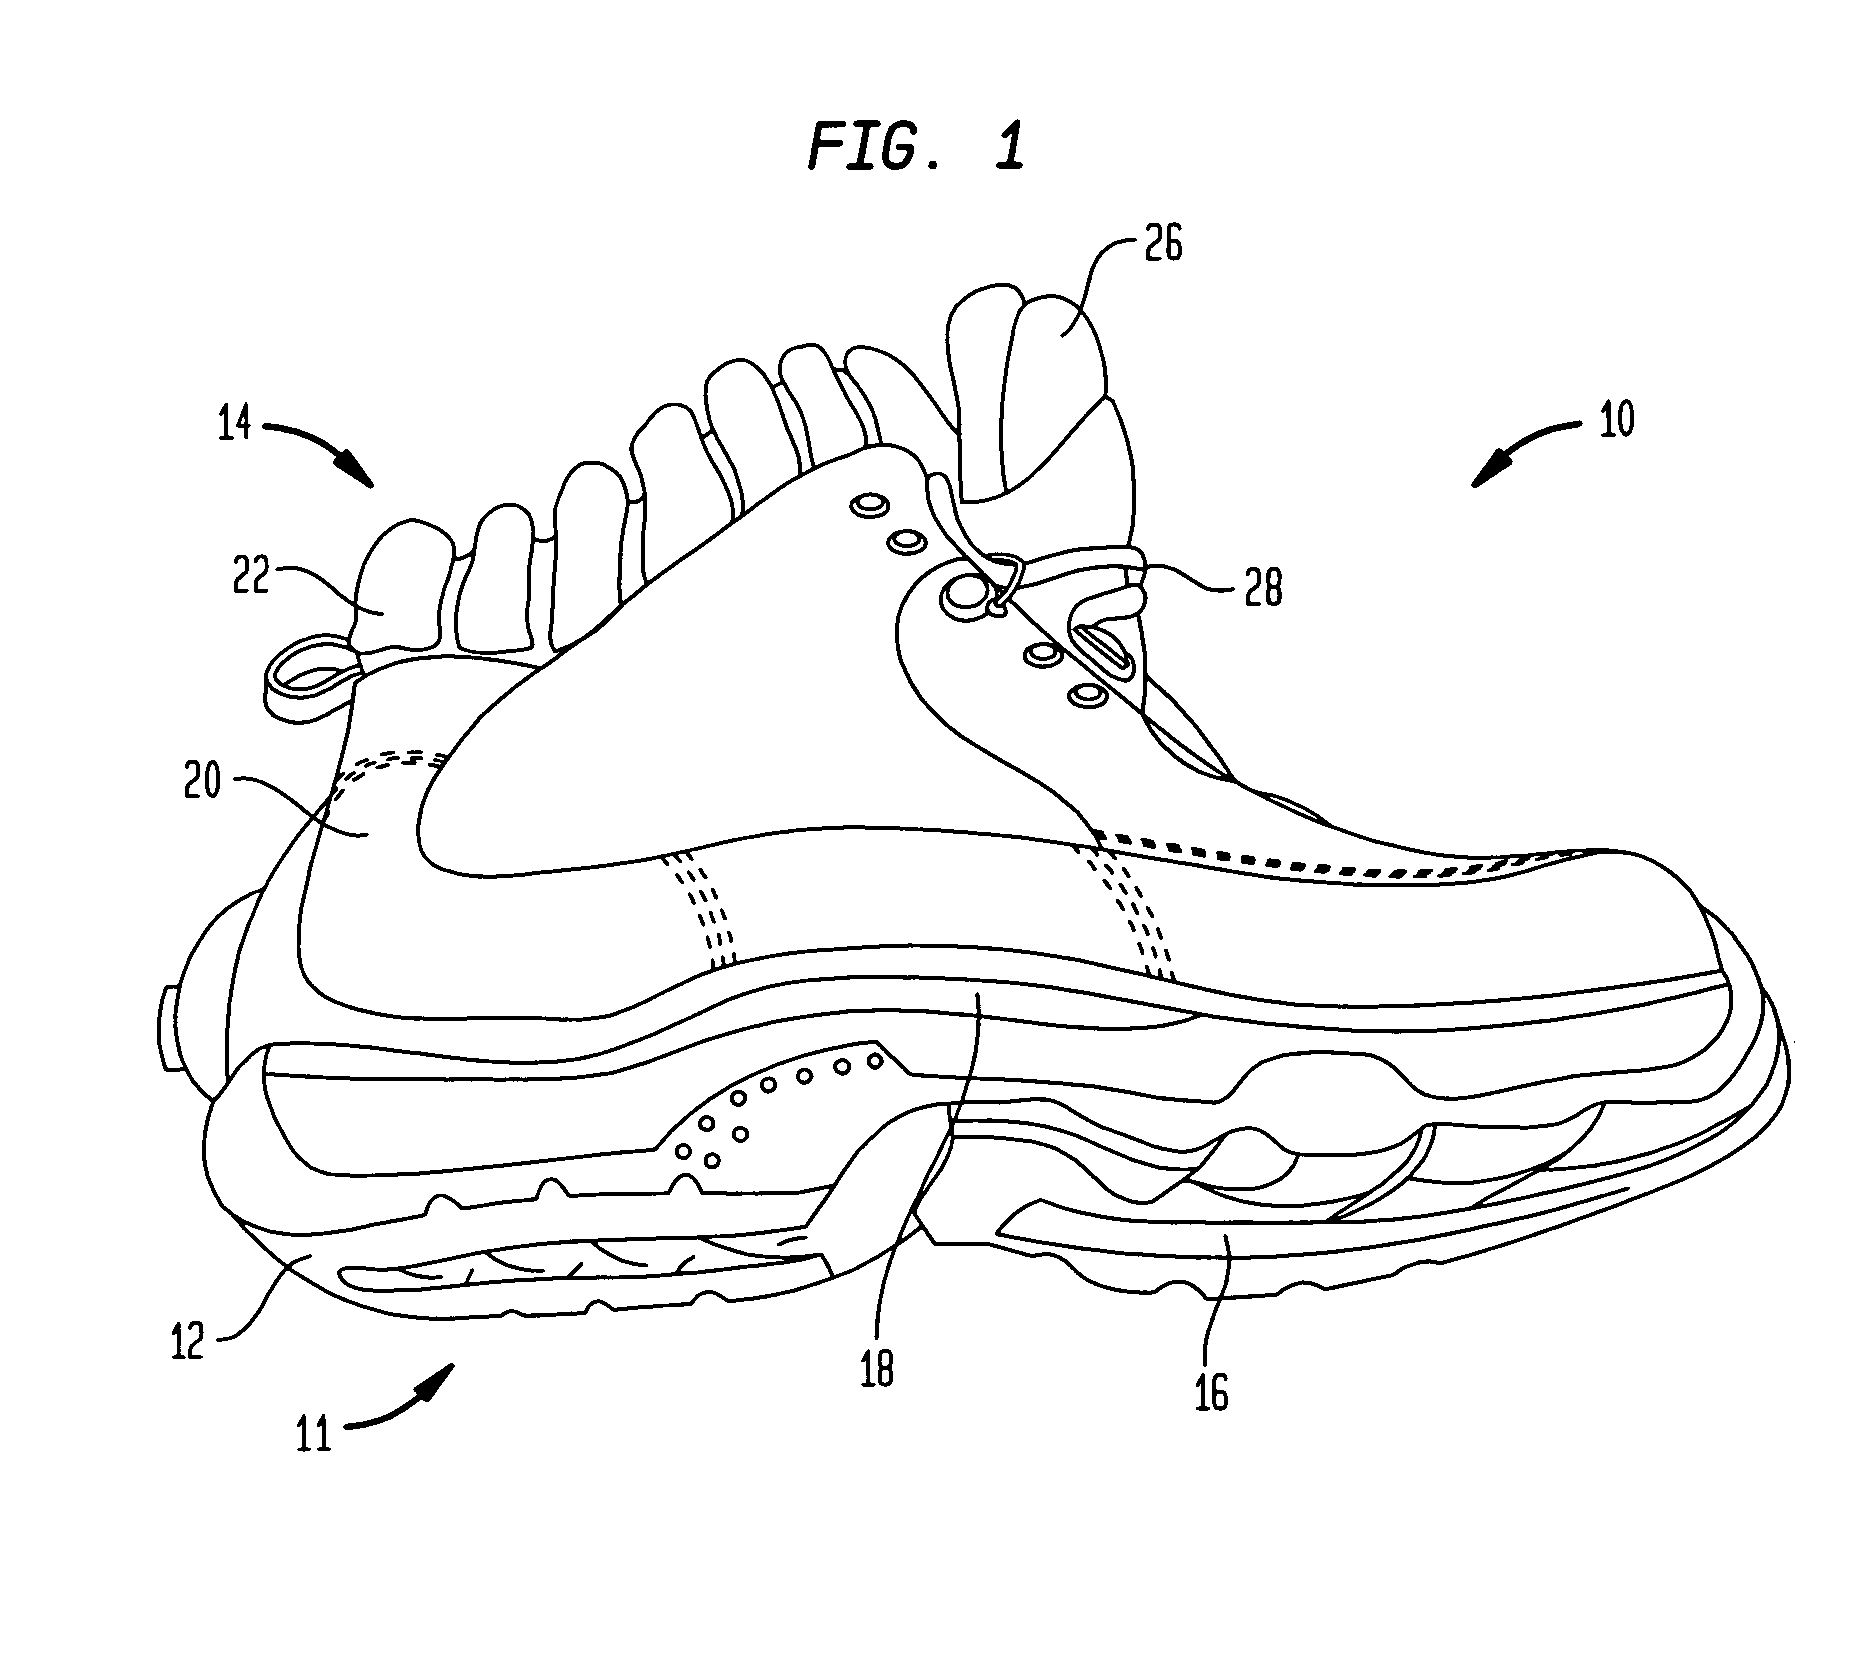 Footwear article with adjustable stiffness